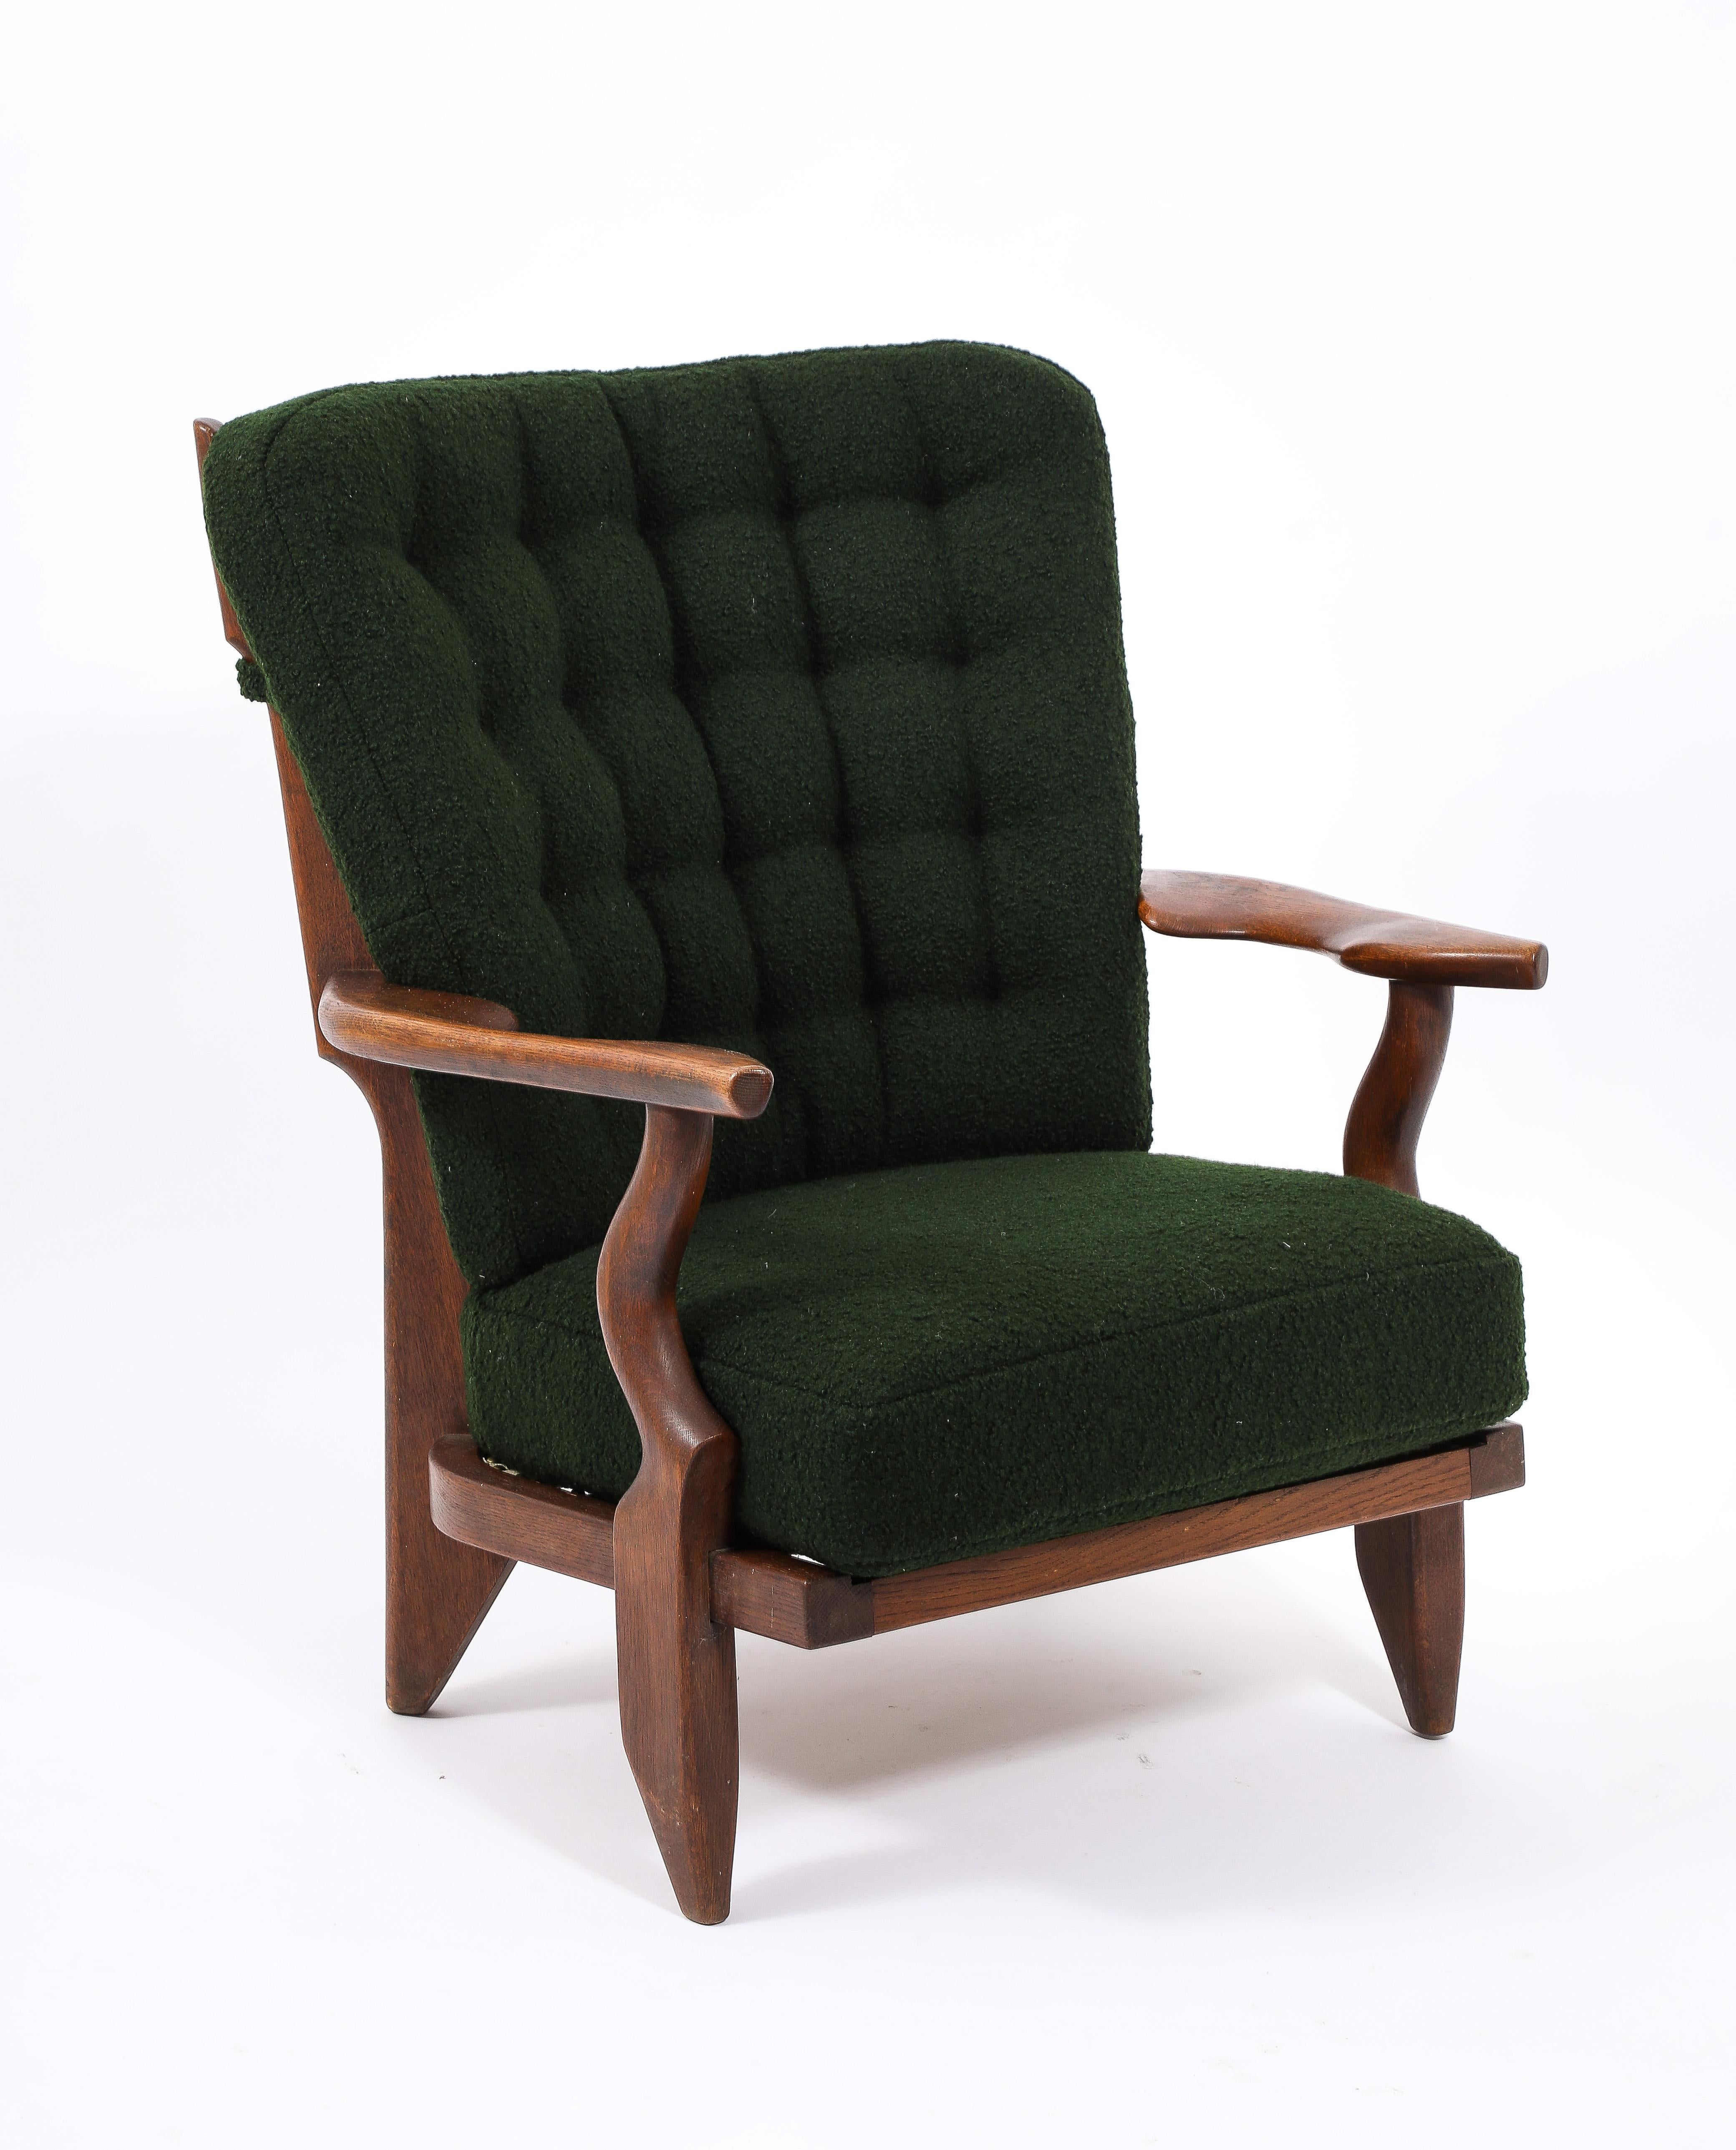 Guillerme & Chambron Petit Repos Armchair in Green Bouclé, France 1950's For Sale 7